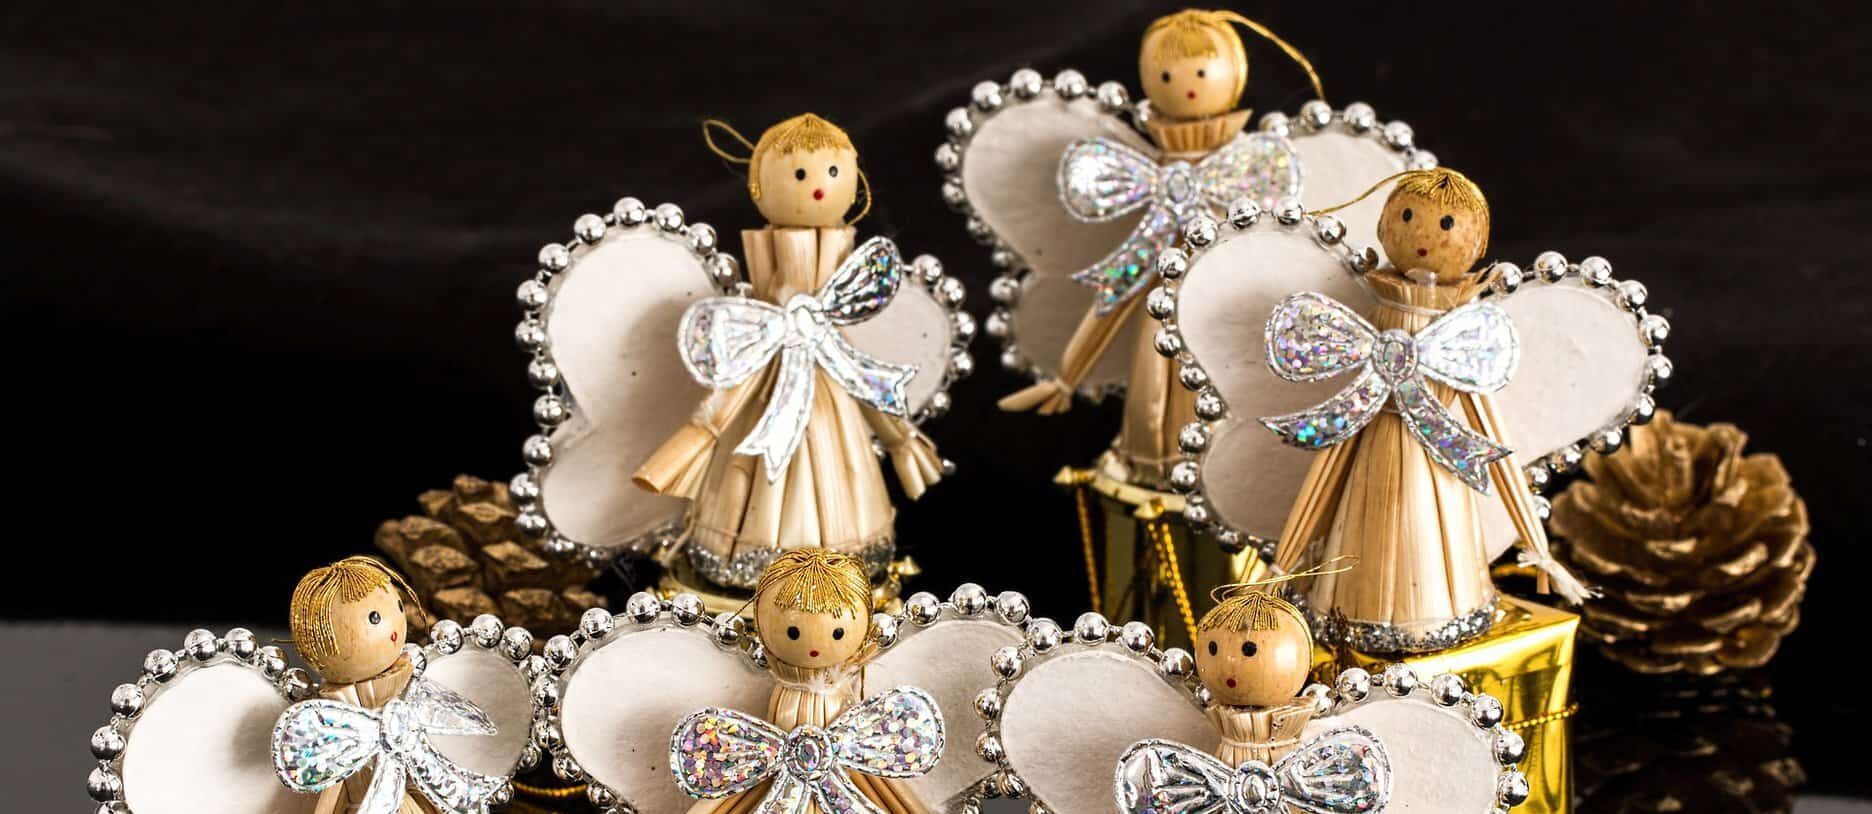 Old fashioned wooden clothespins are seen made into angels with paper wings and embellishments.